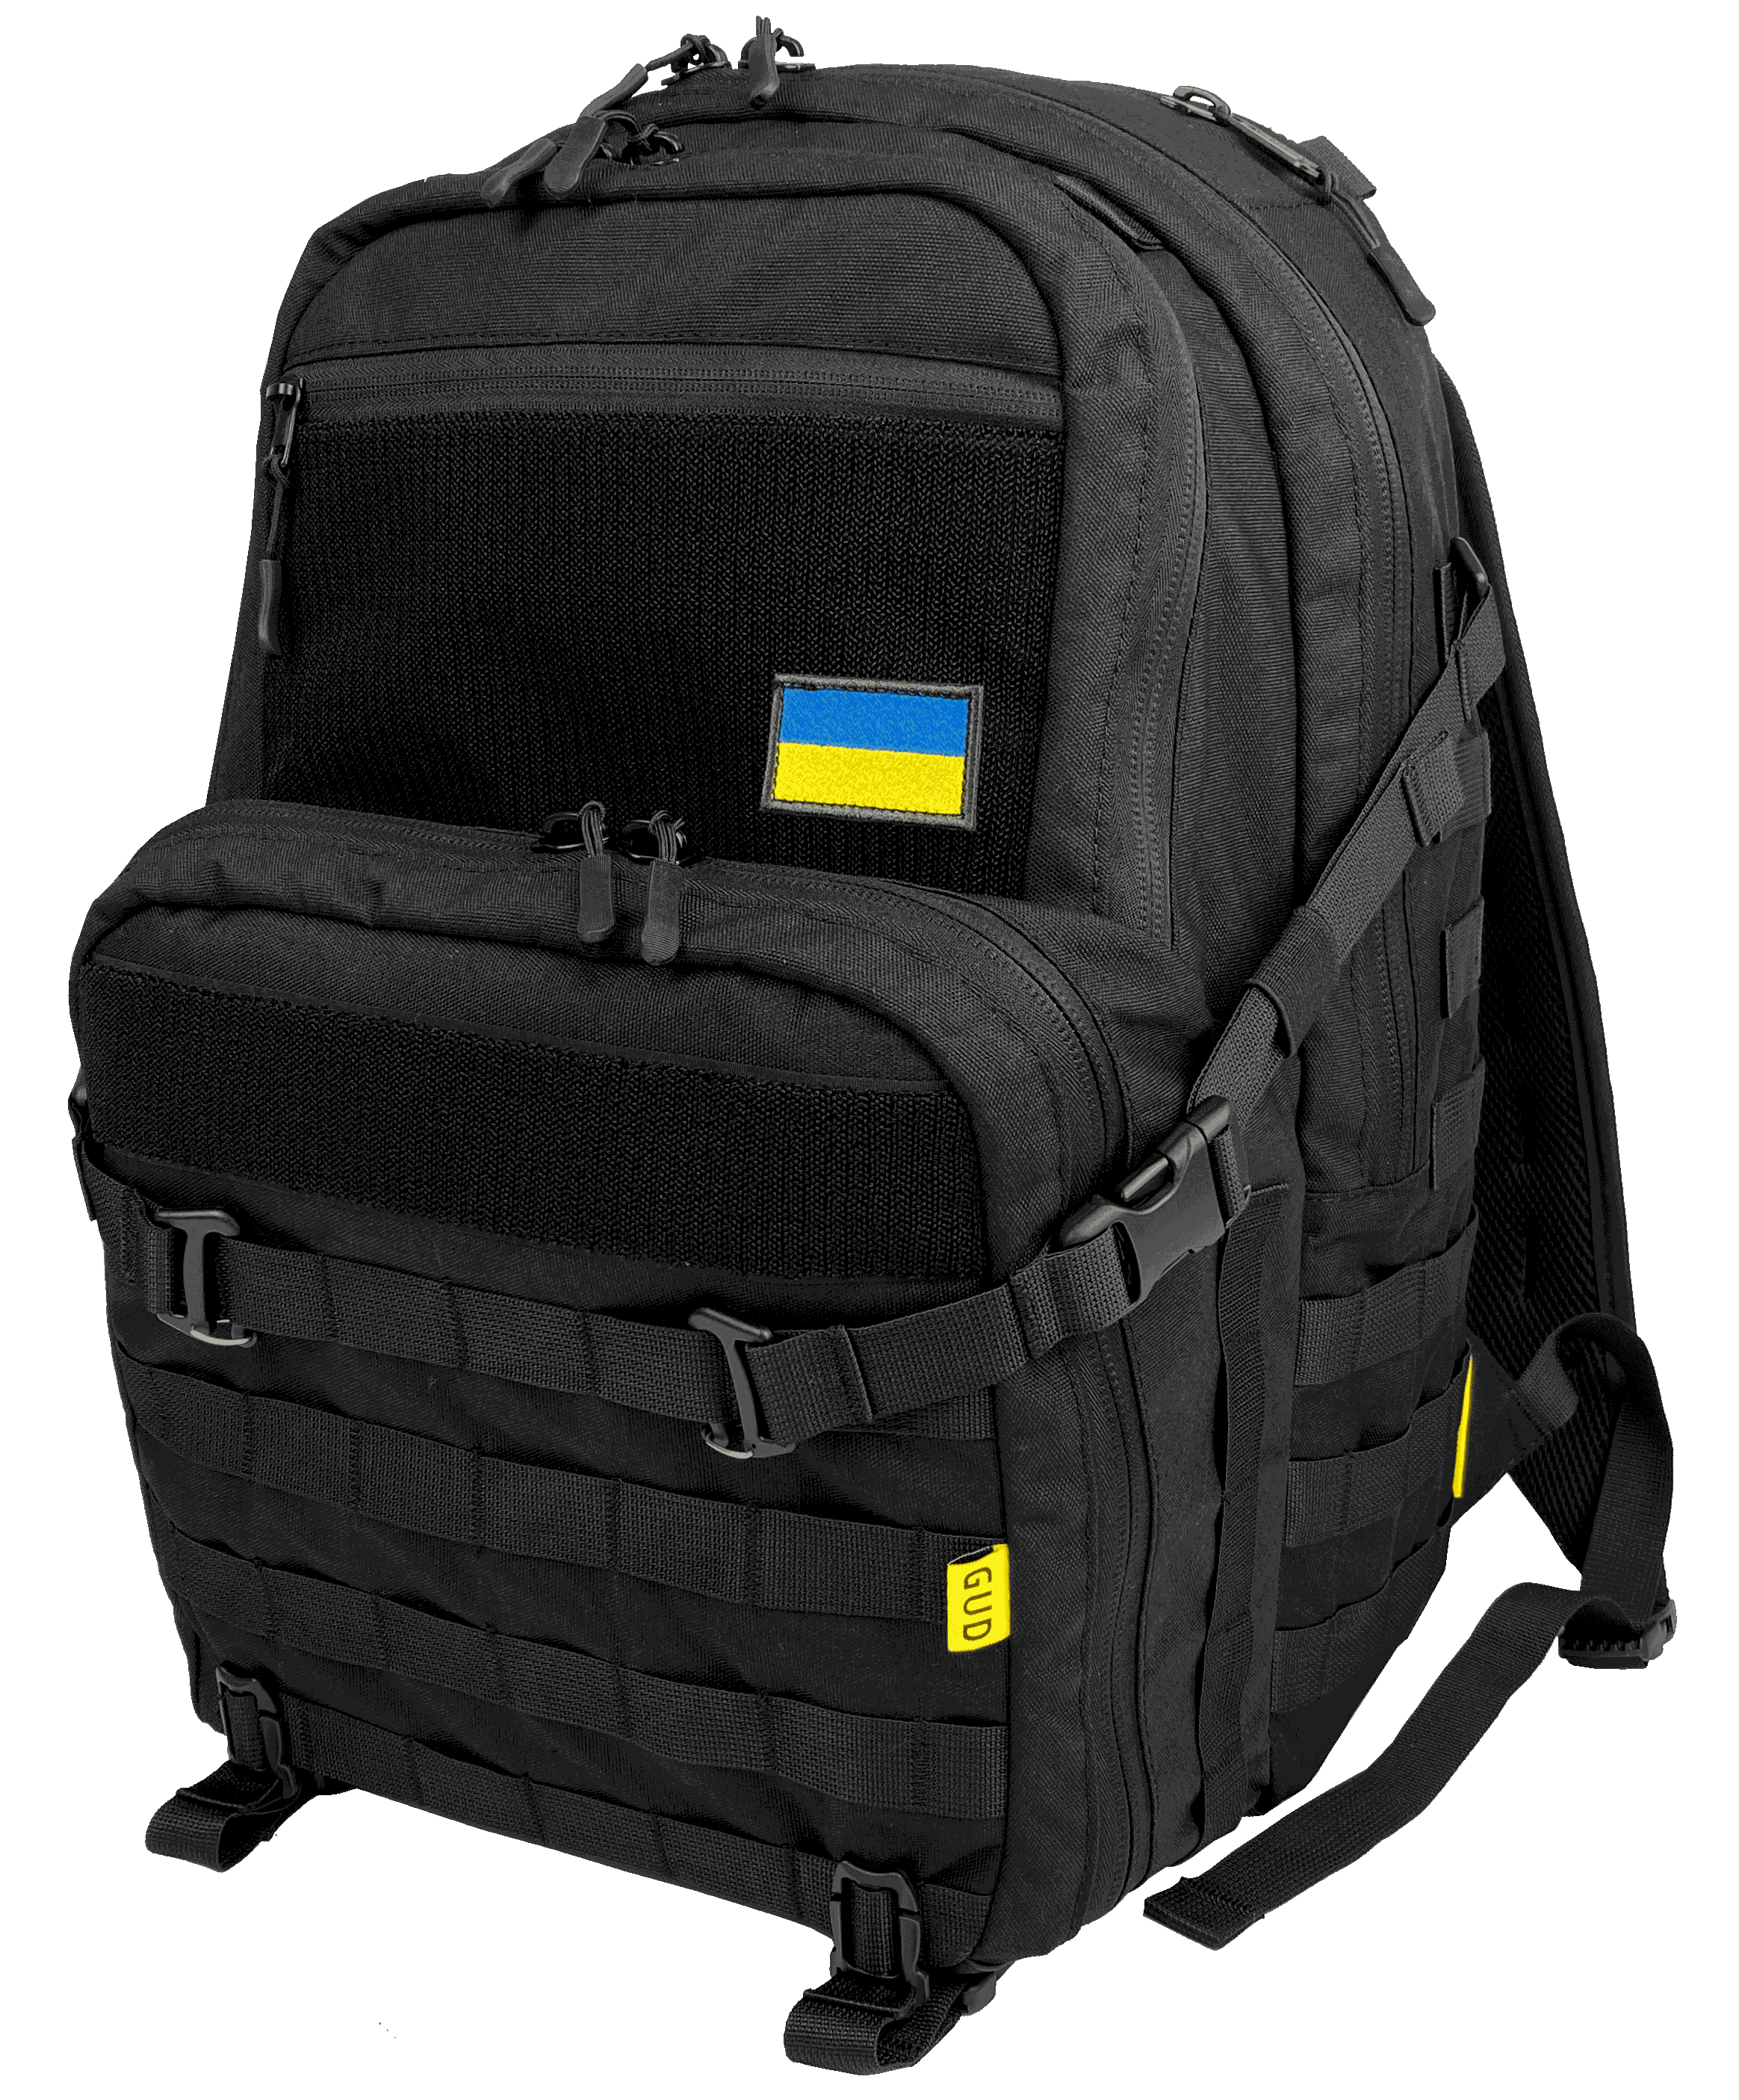 GUD - The biggest in volume GUD backpack perfect for outdoor explorations  and travels: - Made of heavy-duty waterproof 1000D CORDURA® fabric - Top  loading main compartment - DWR� (durable water resistant)